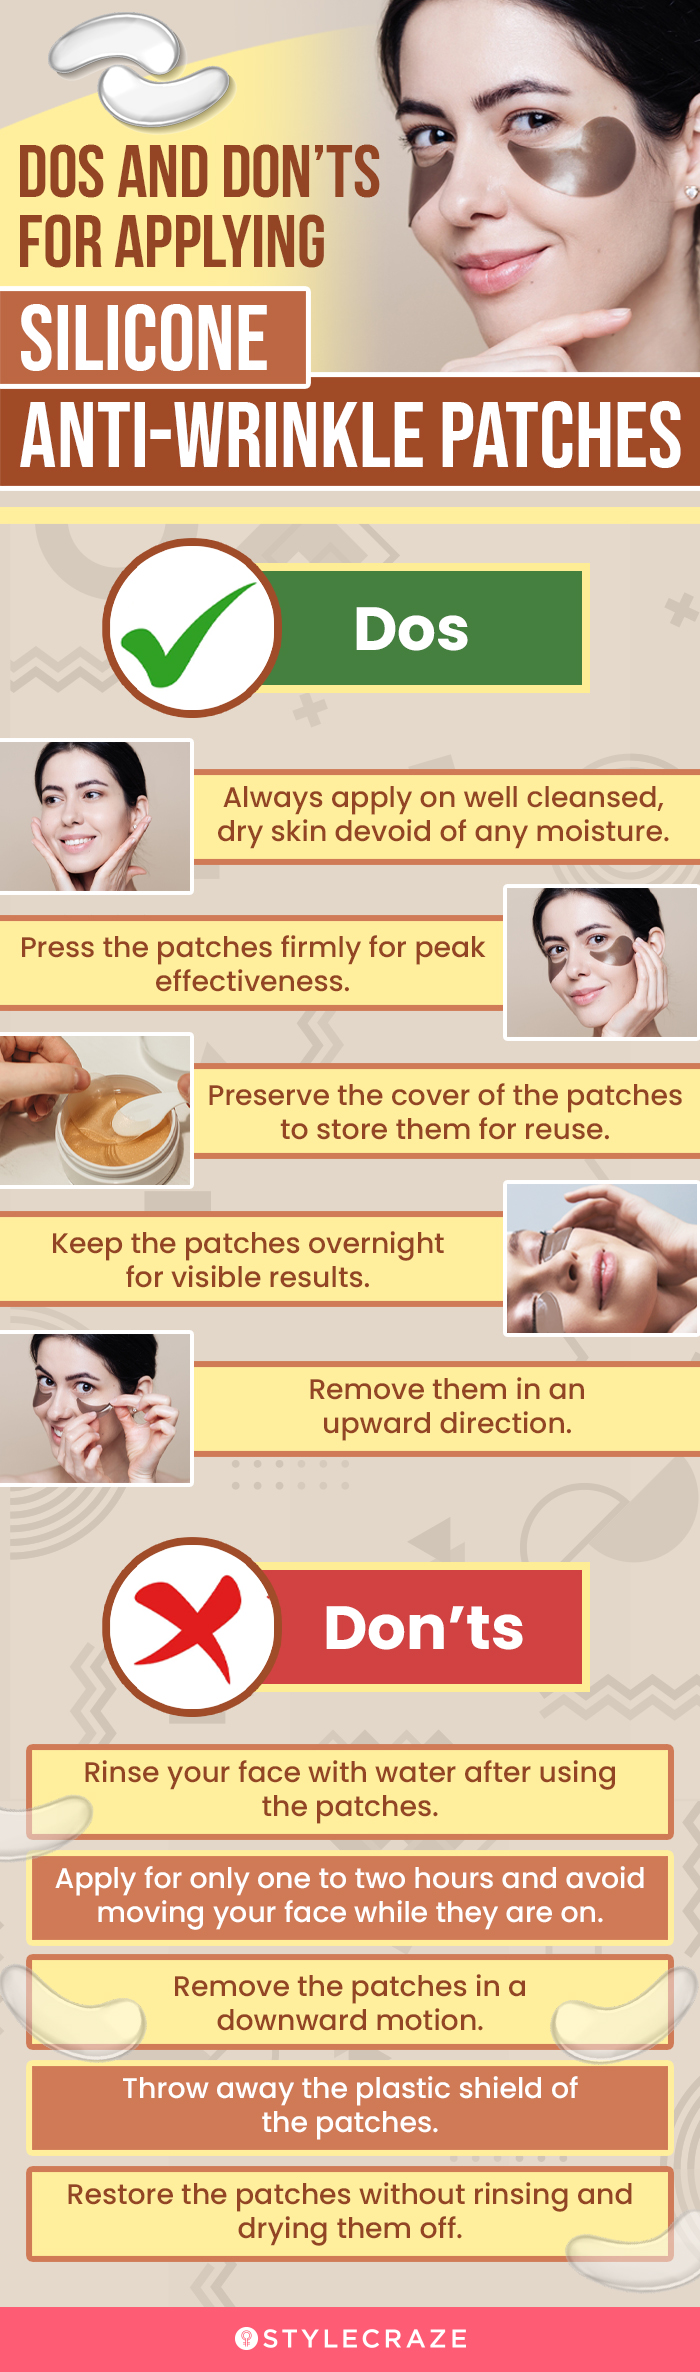 Do’s And Don’ts For Applying Silicone Anti-Wrinkle Patches (infographic)